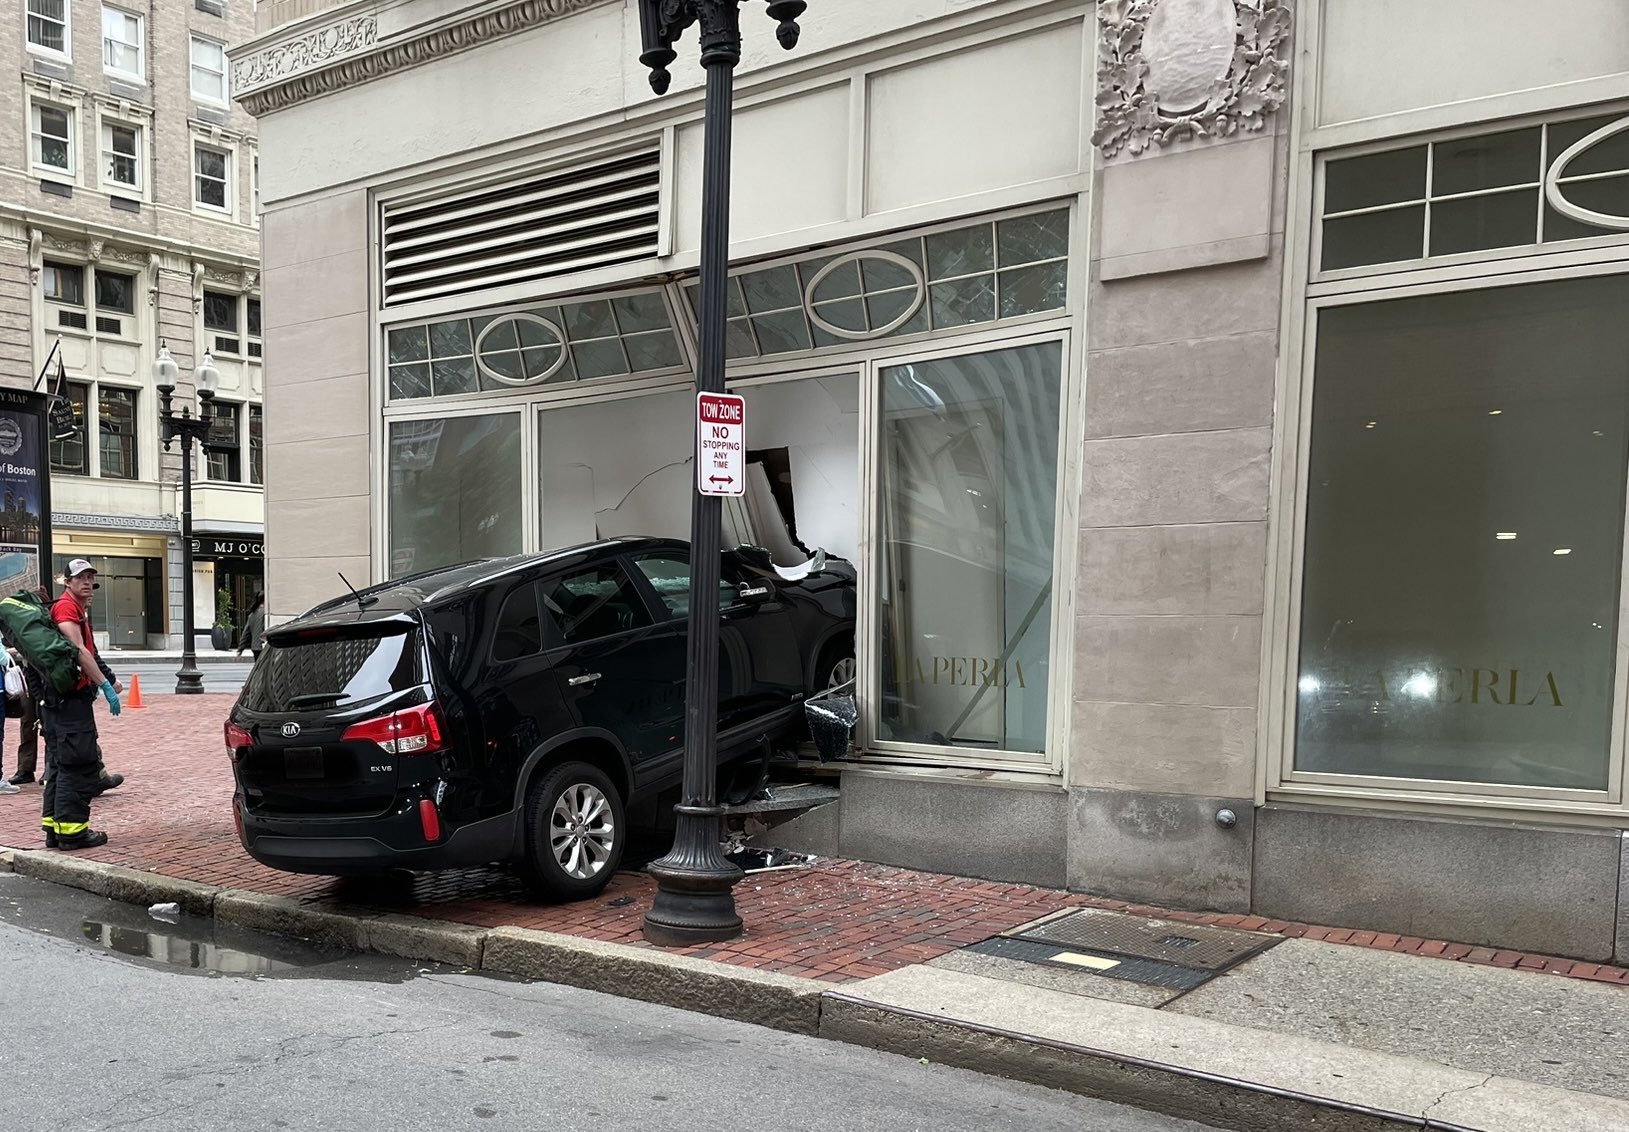 SUV crashes into front of former luxury lingerie store in Boston